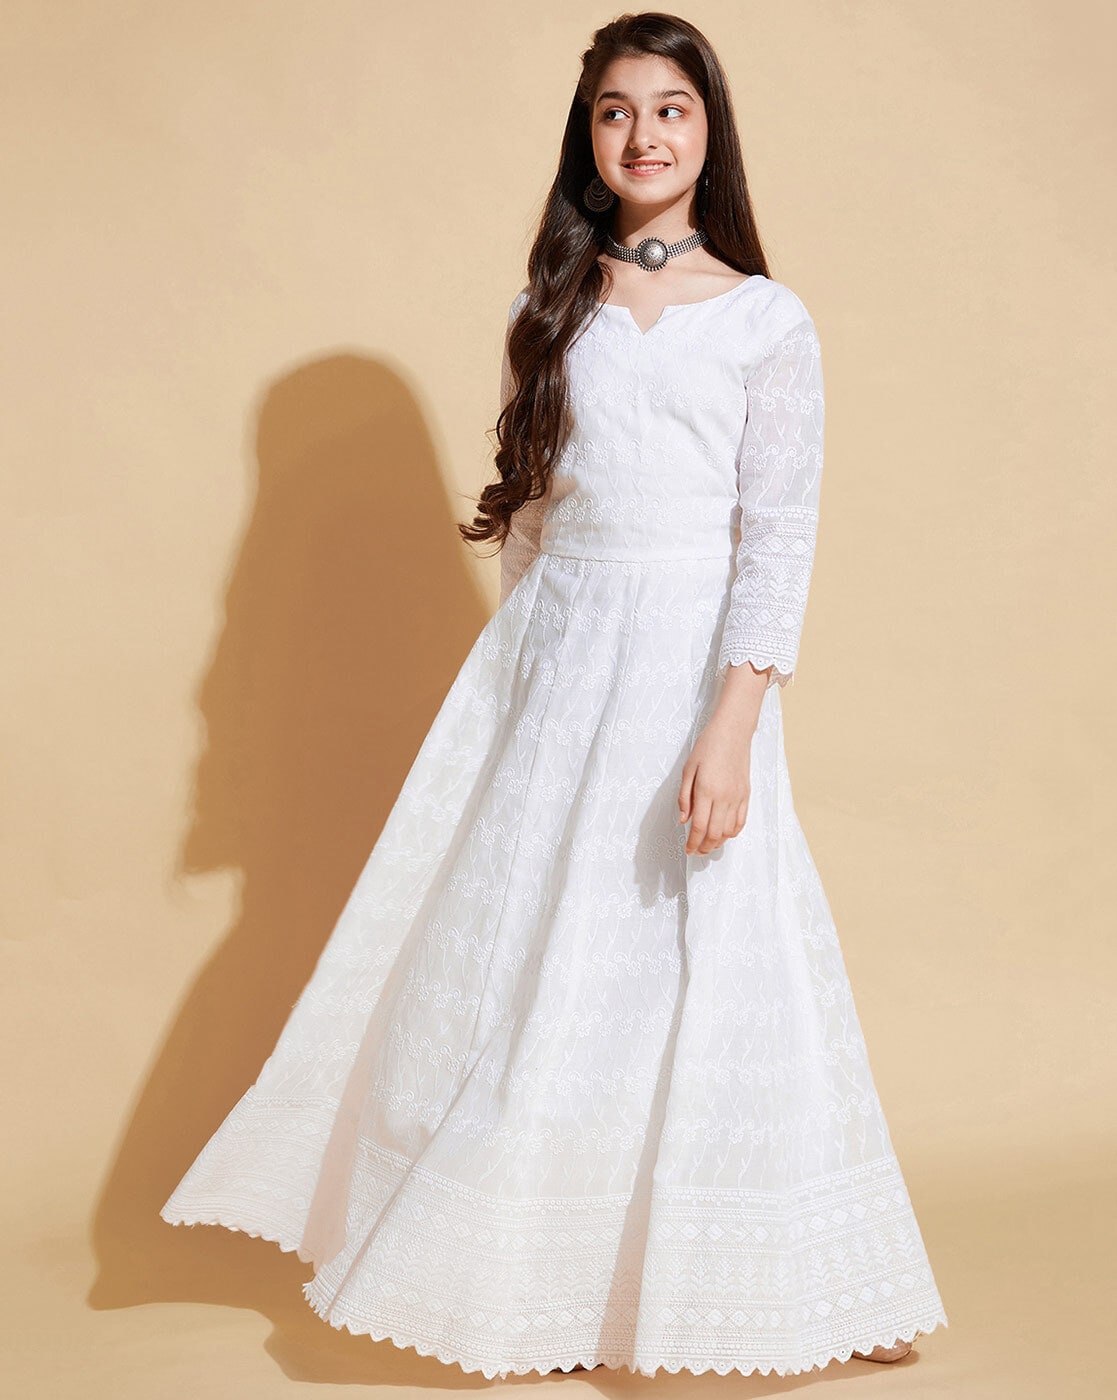 Full Sleeve Gown Dress For Girls Online | Up To 50% OFF-hoanganhbinhduong.edu.vn